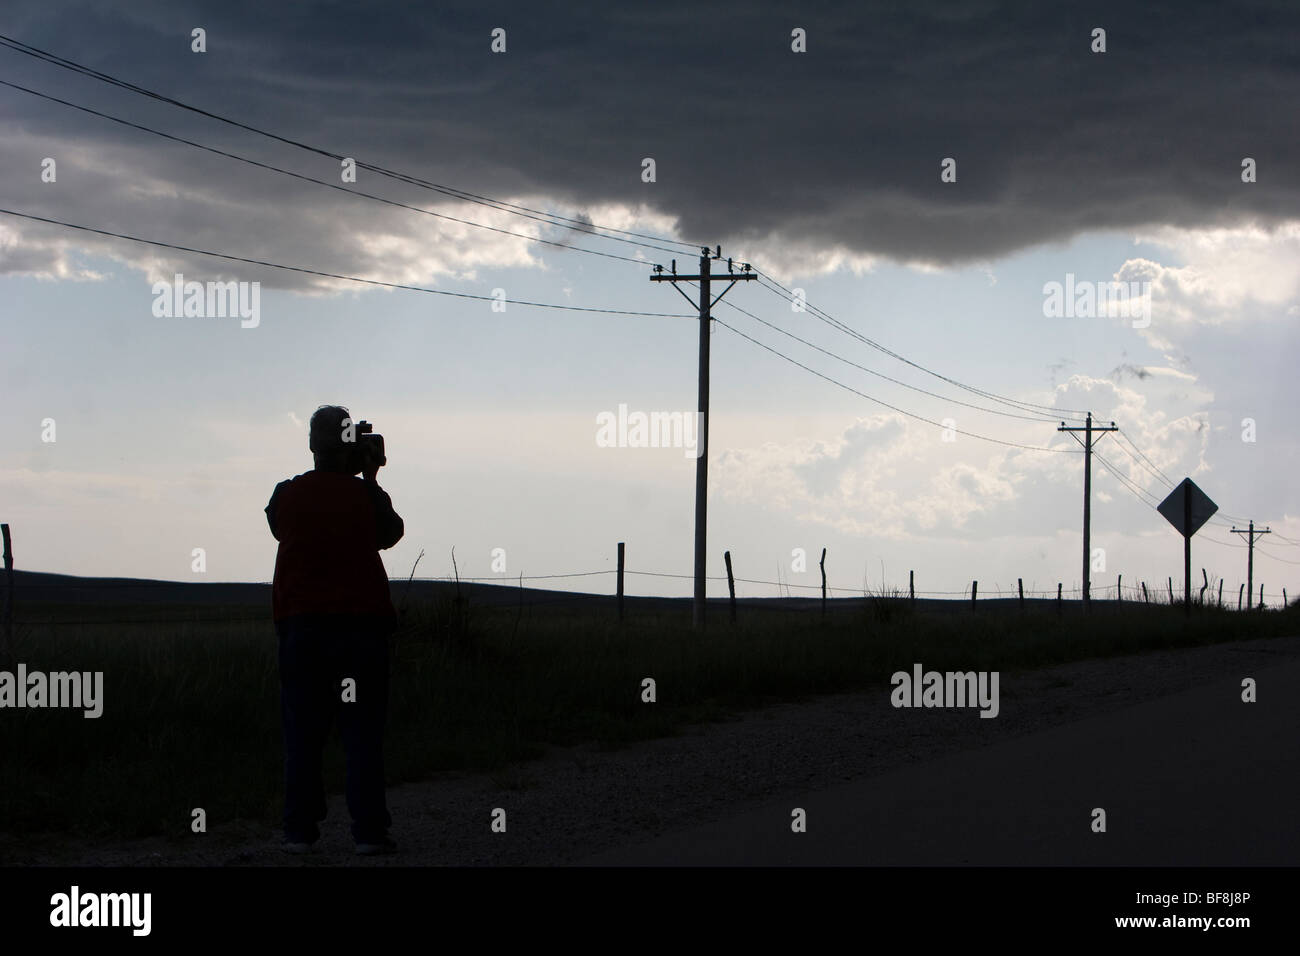 A cameraman films during a thunderstorm. Stock Photo